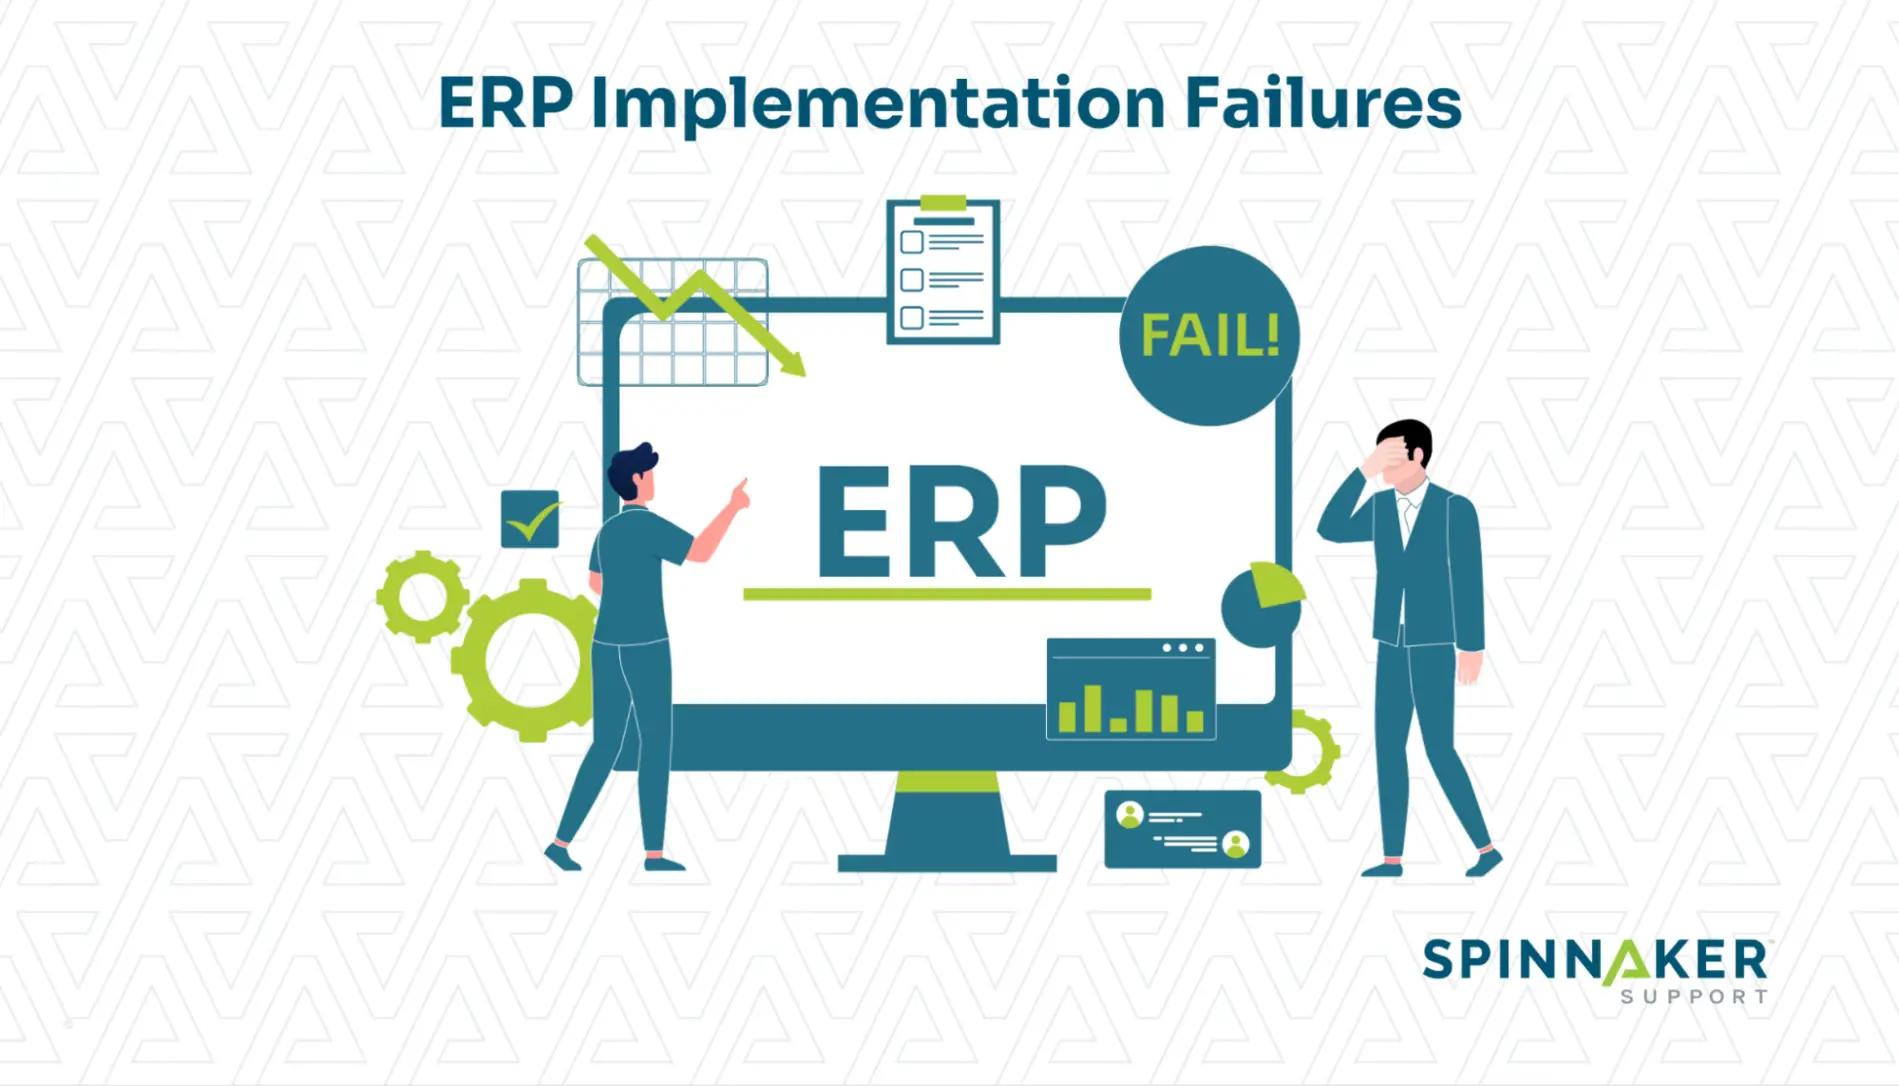 Implementing an ERP system